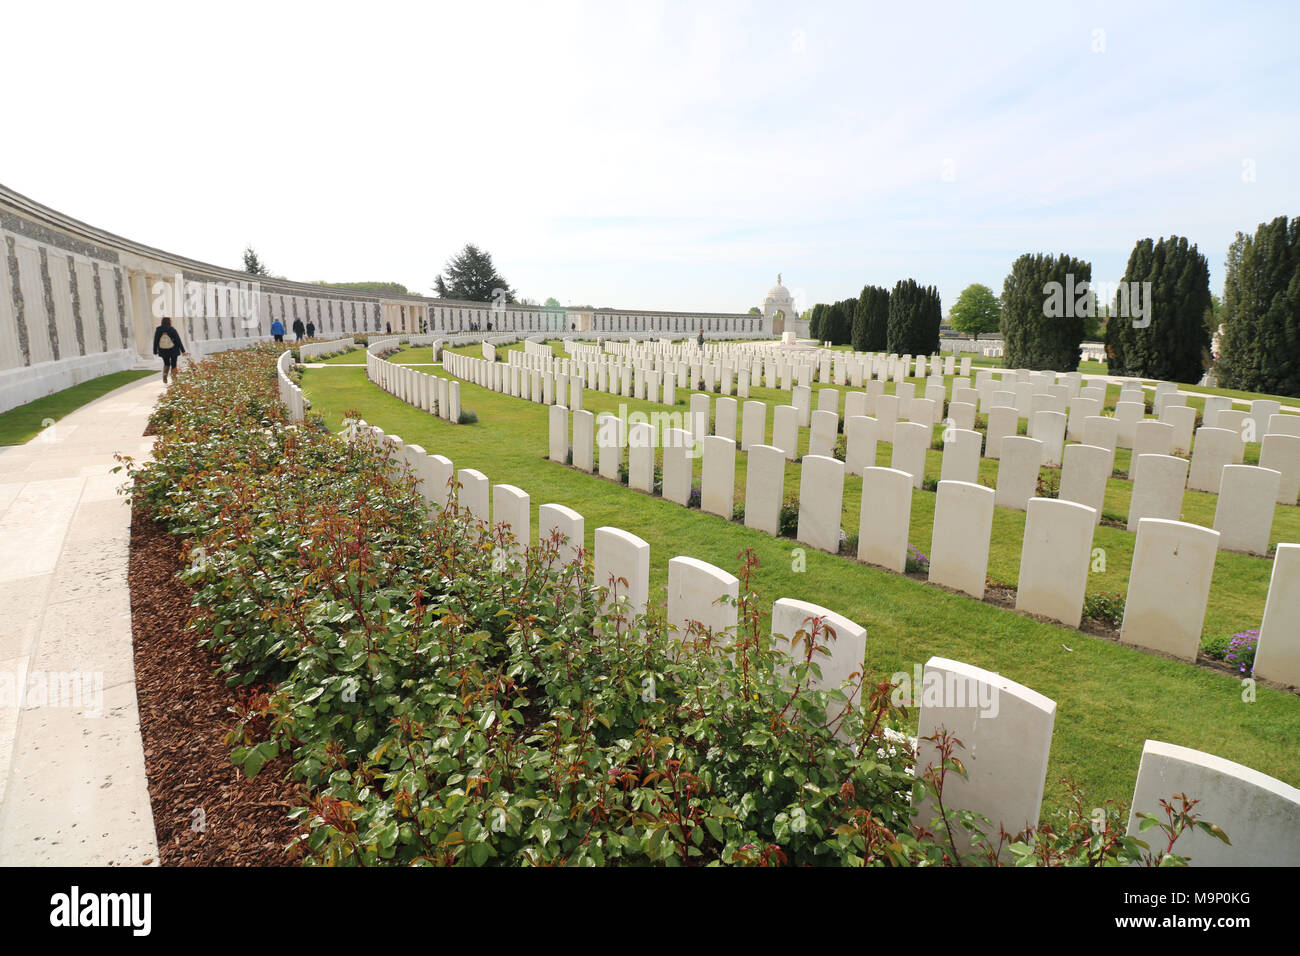 Tyne Cot Commonwealth War Graves Cemetery Flower Beds, Graves and Memorial Wall Stock Photo